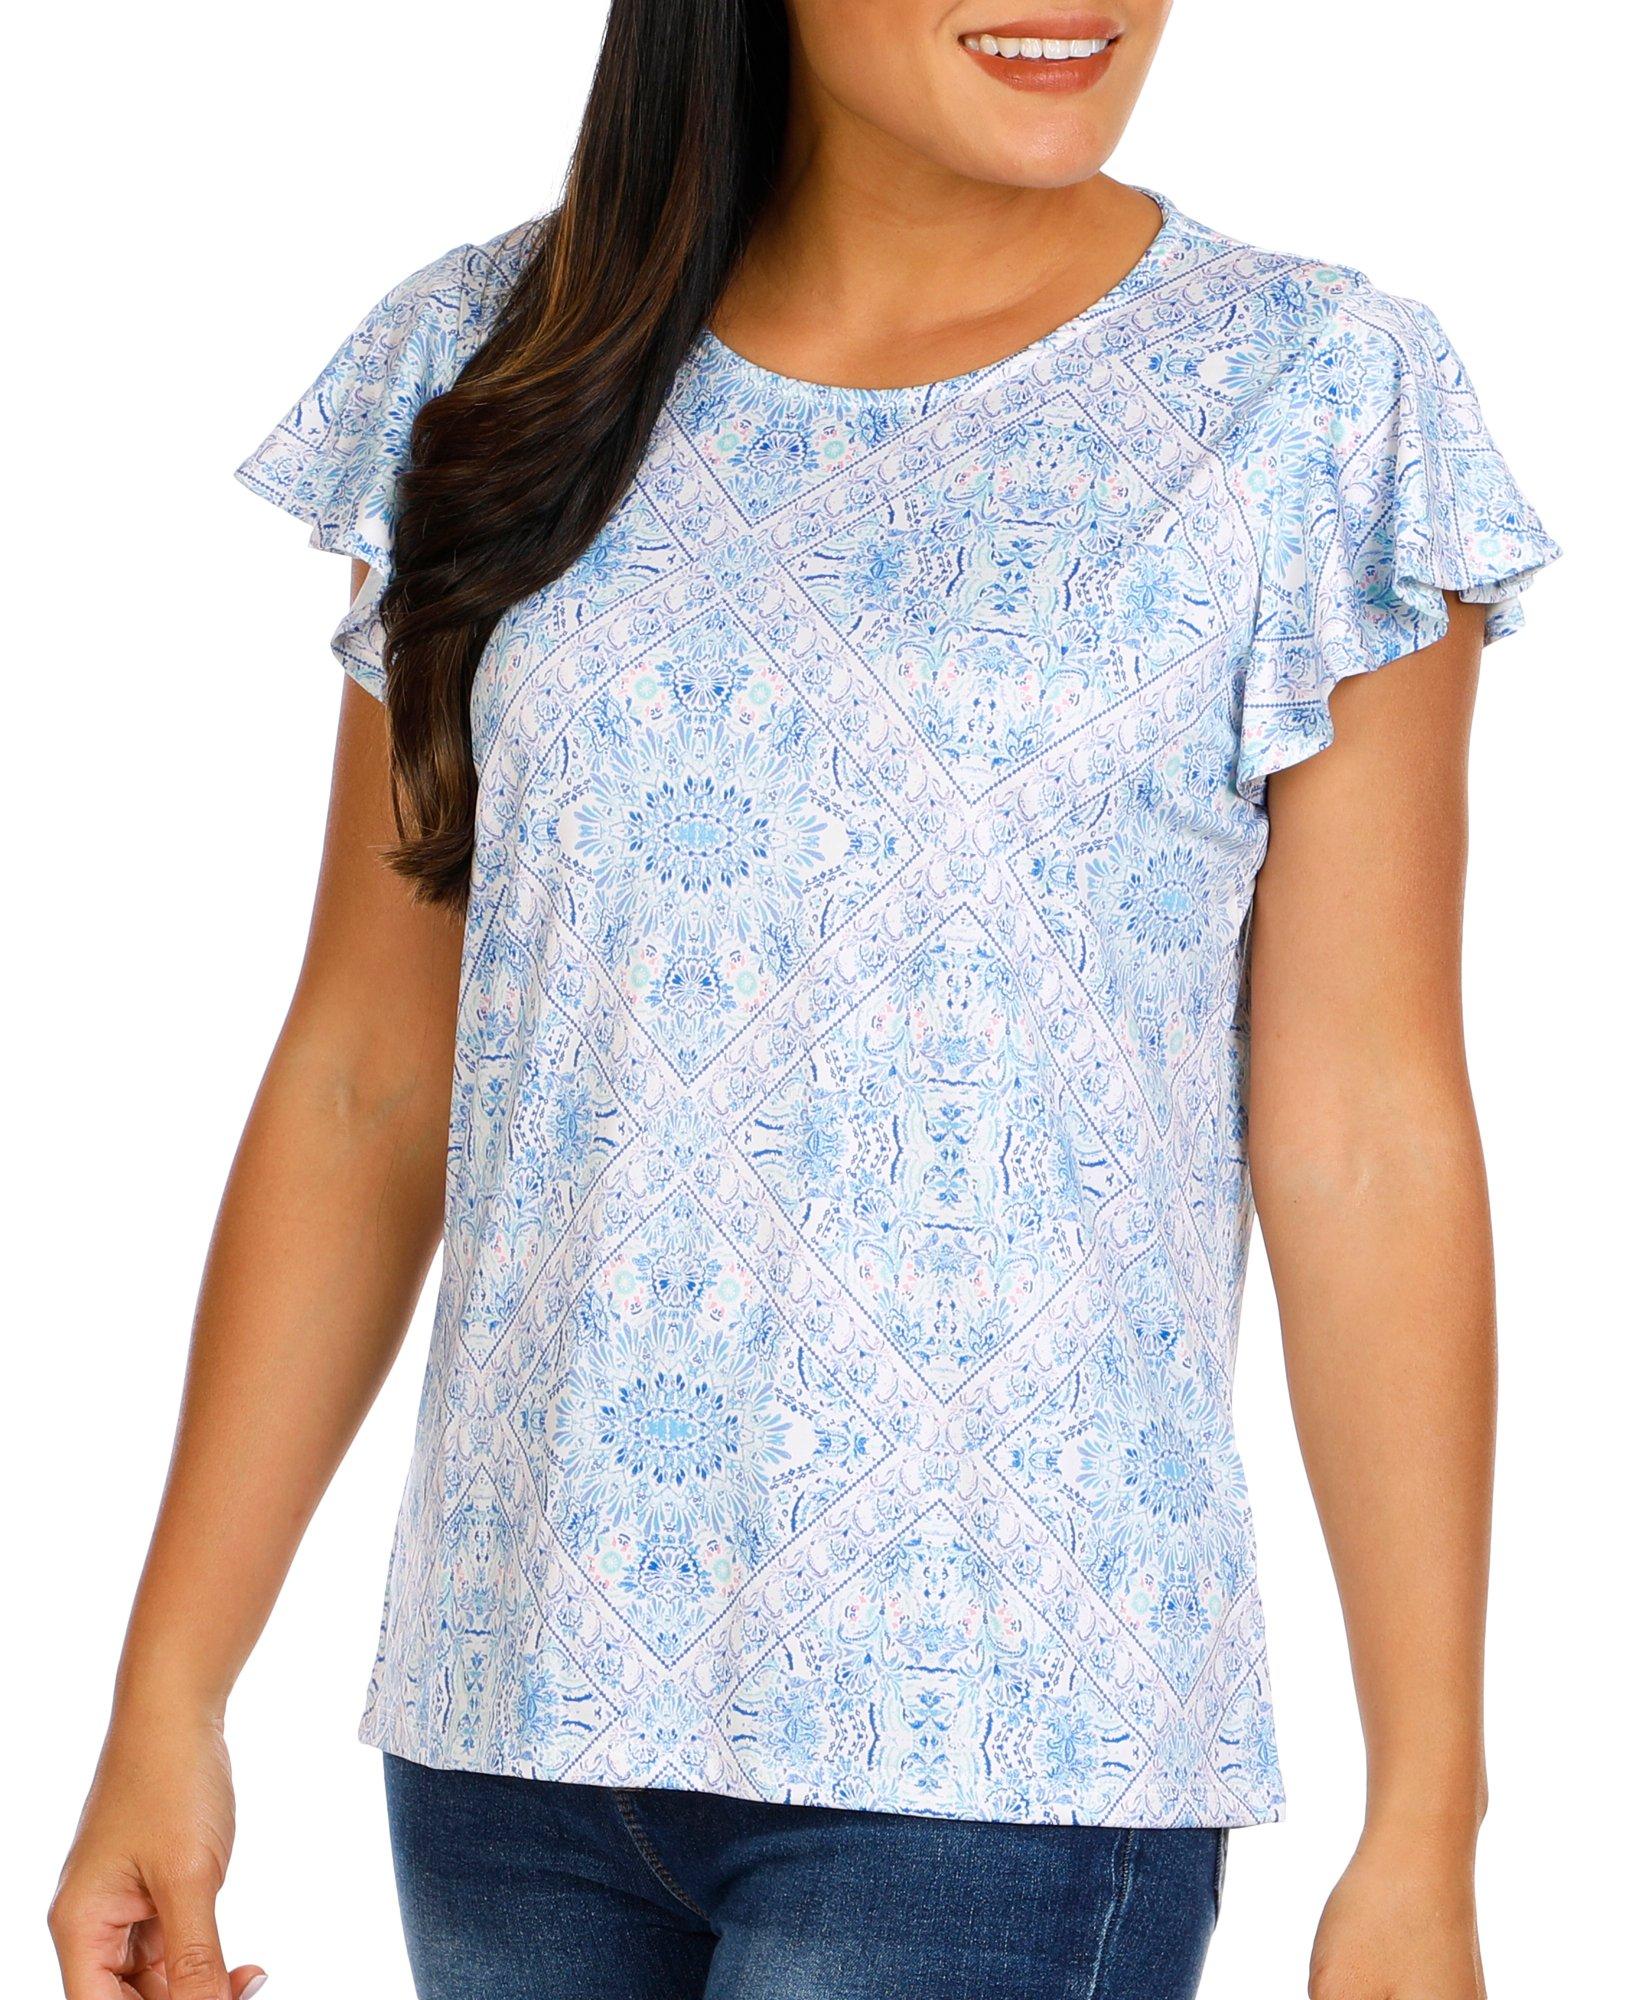 Hollister paisley floral lace accent top Size L - $20 - From Valerie